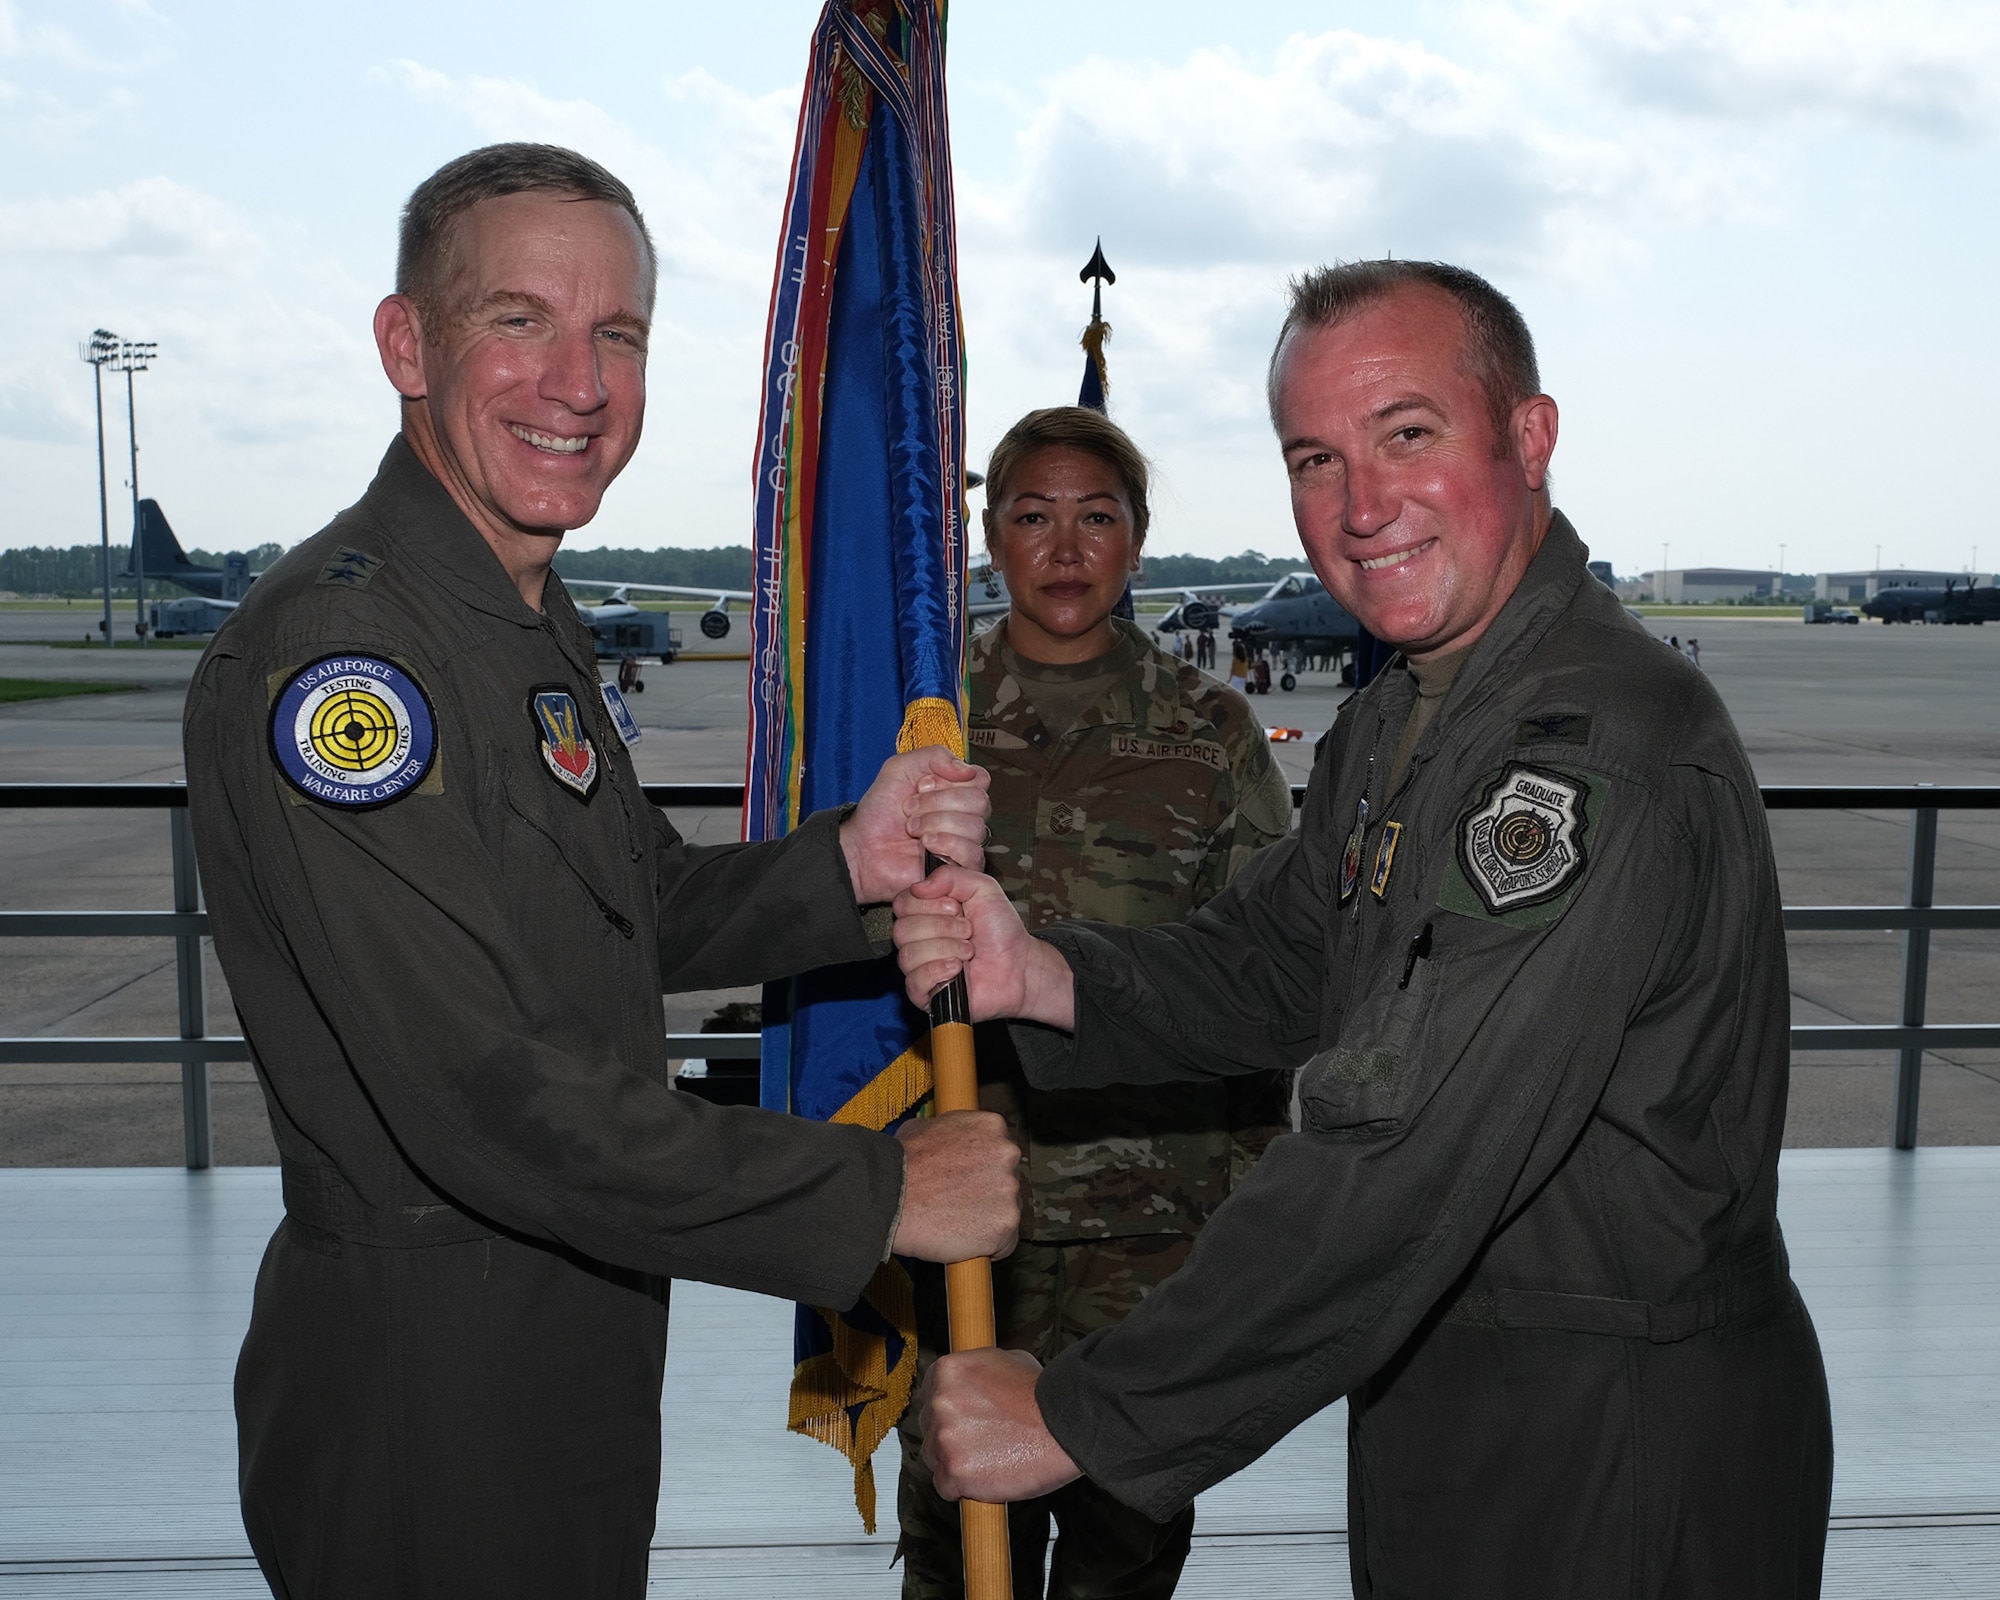 photo of three uniformed U.S. Air Force Airmen stand on a stand, two in the foreground holding a unit flag, while the third Airman stands at attention in the background are two A-10Cs and an airborne warning and control system, or AWACS, aircraft on Hurlburt Field flightline.